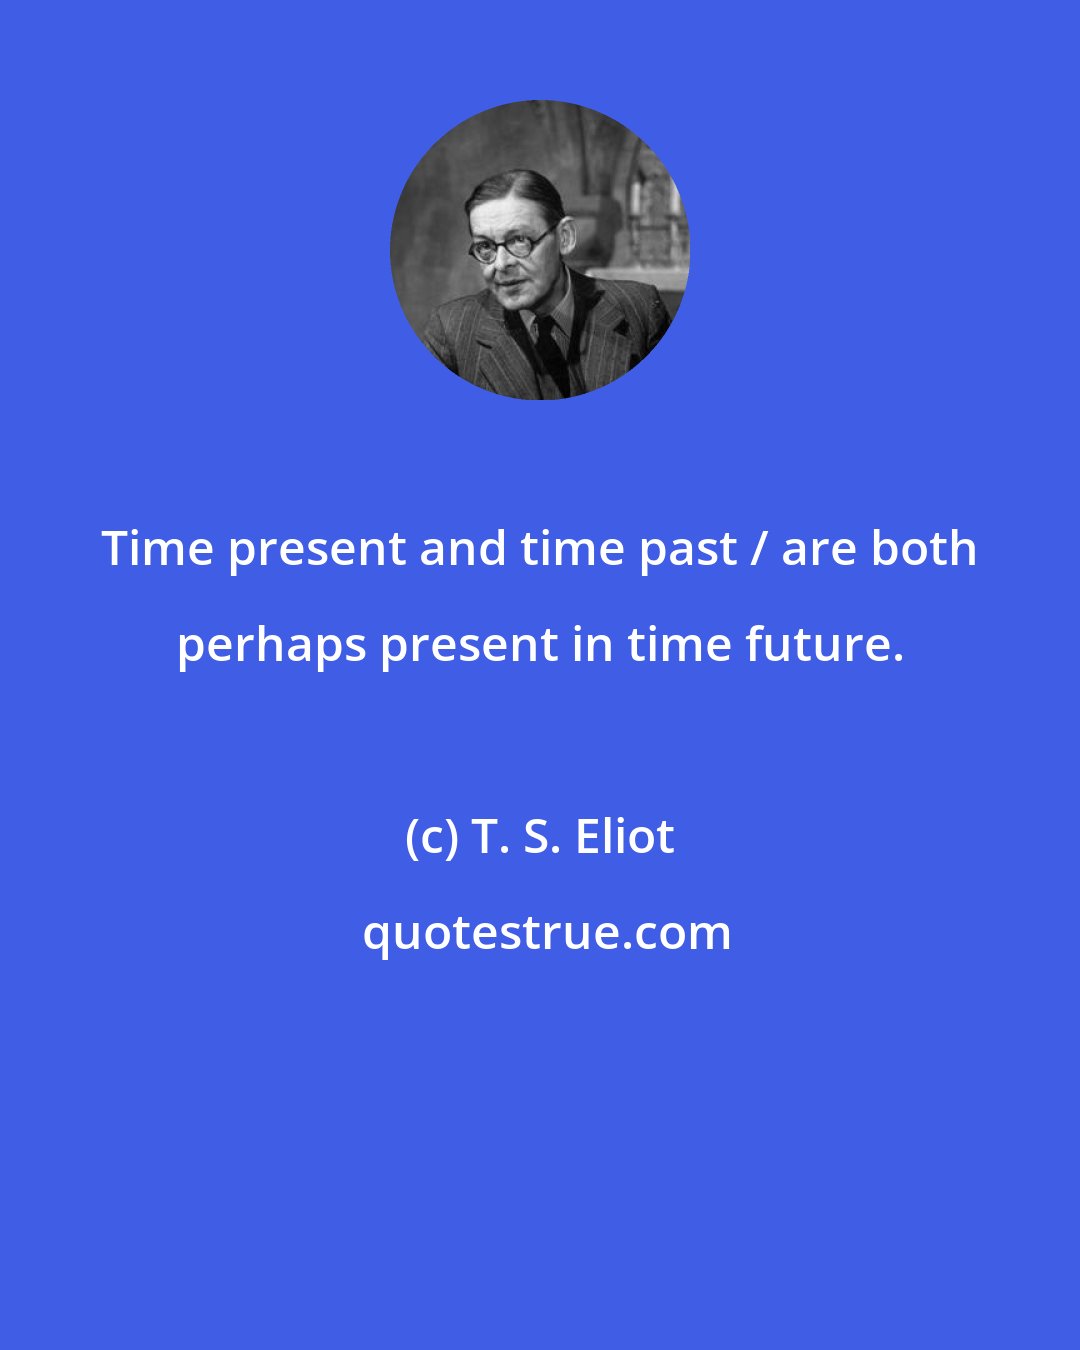 T. S. Eliot: Time present and time past / are both perhaps present in time future.